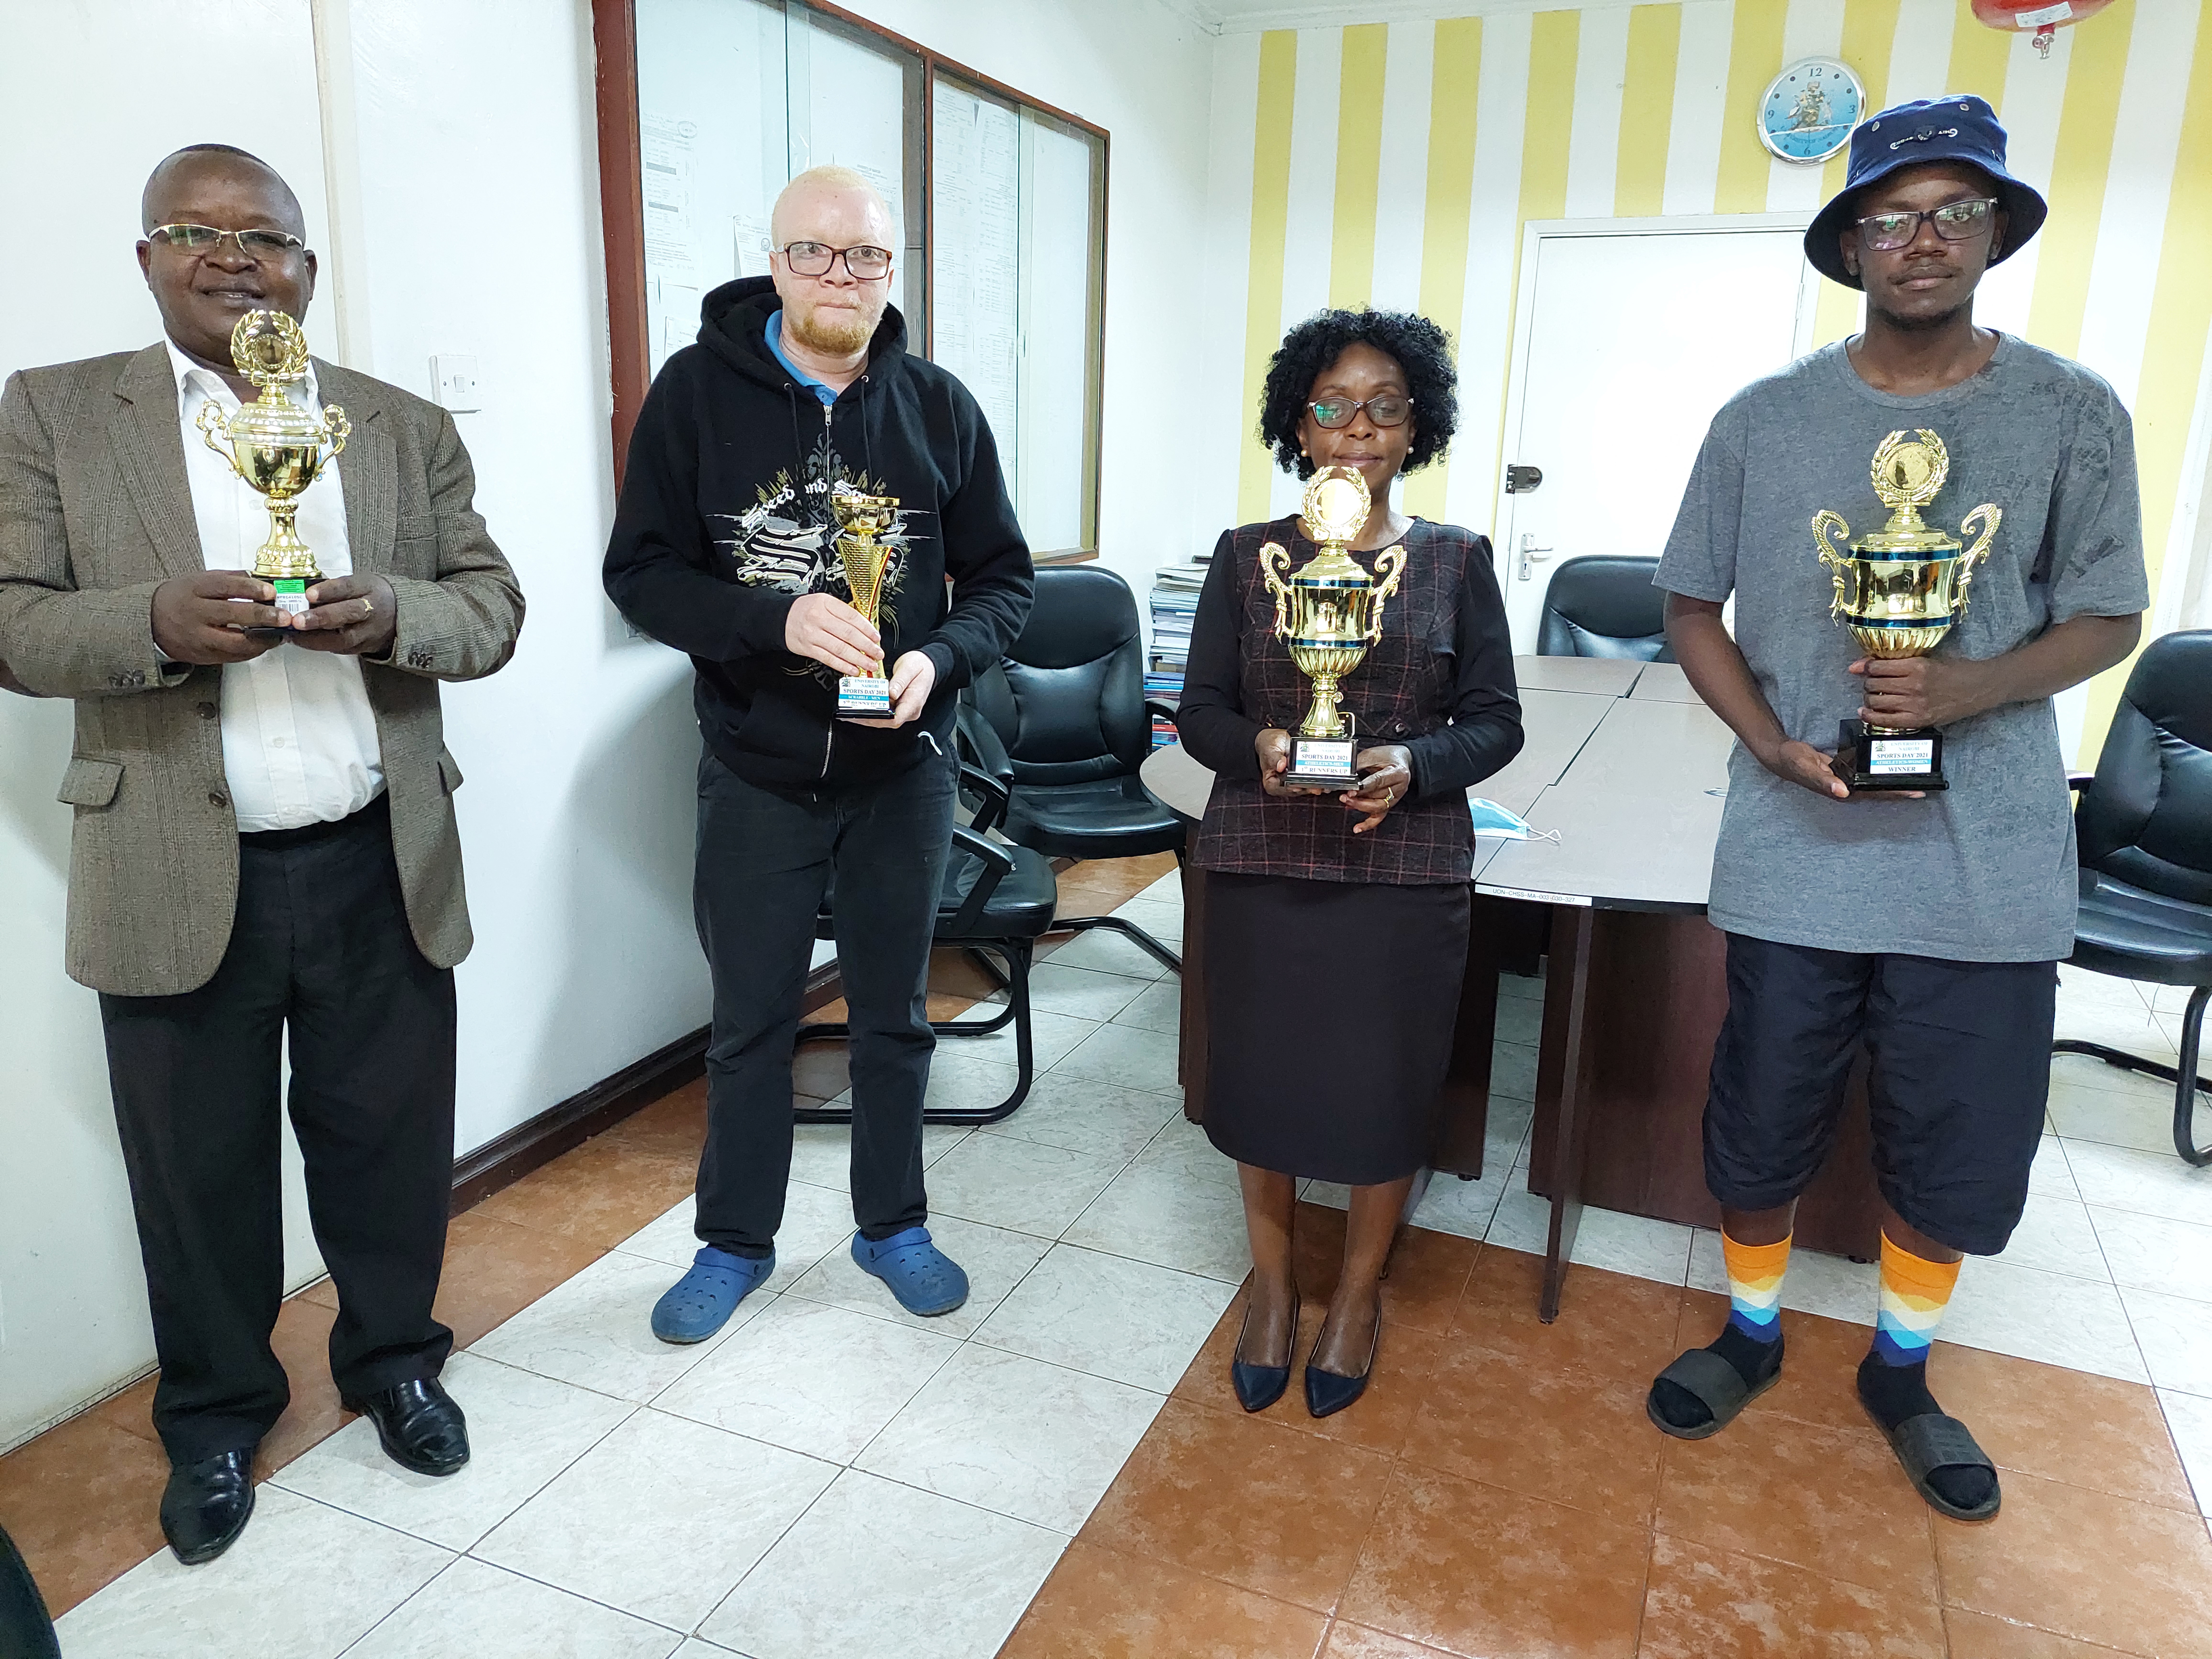 SPORTS & WELFARE REP Presents Trophies to the Dean School of Law